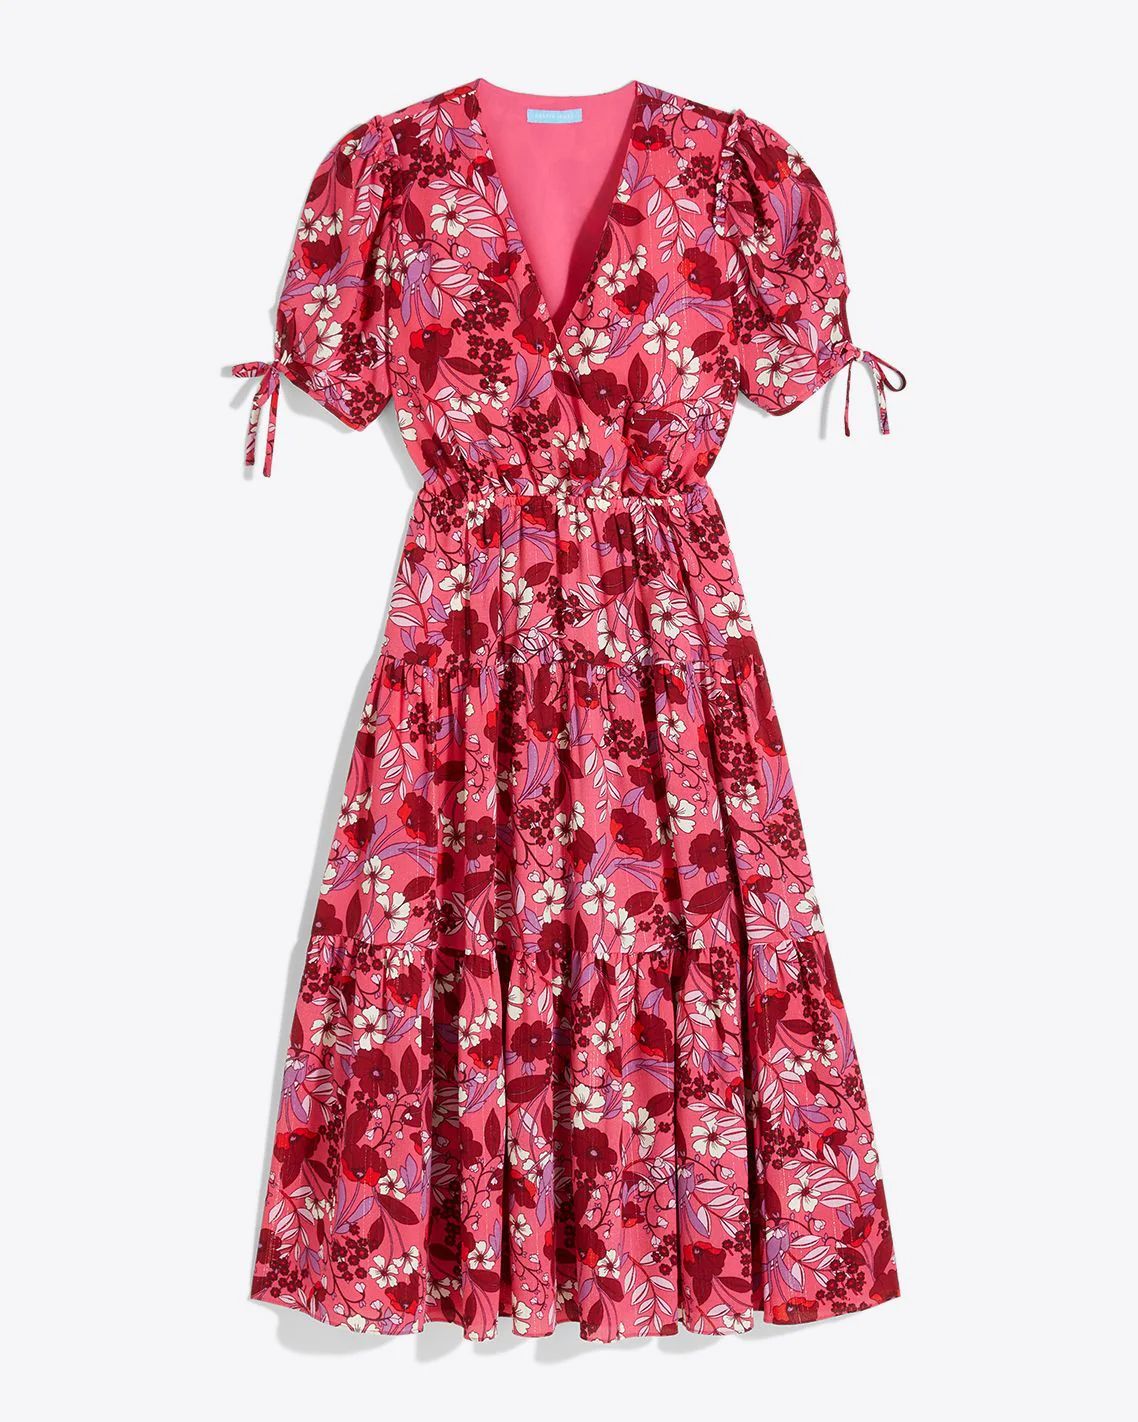 Faux Wrap Dress in Raspberry Clematis Floral | Draper James (US)